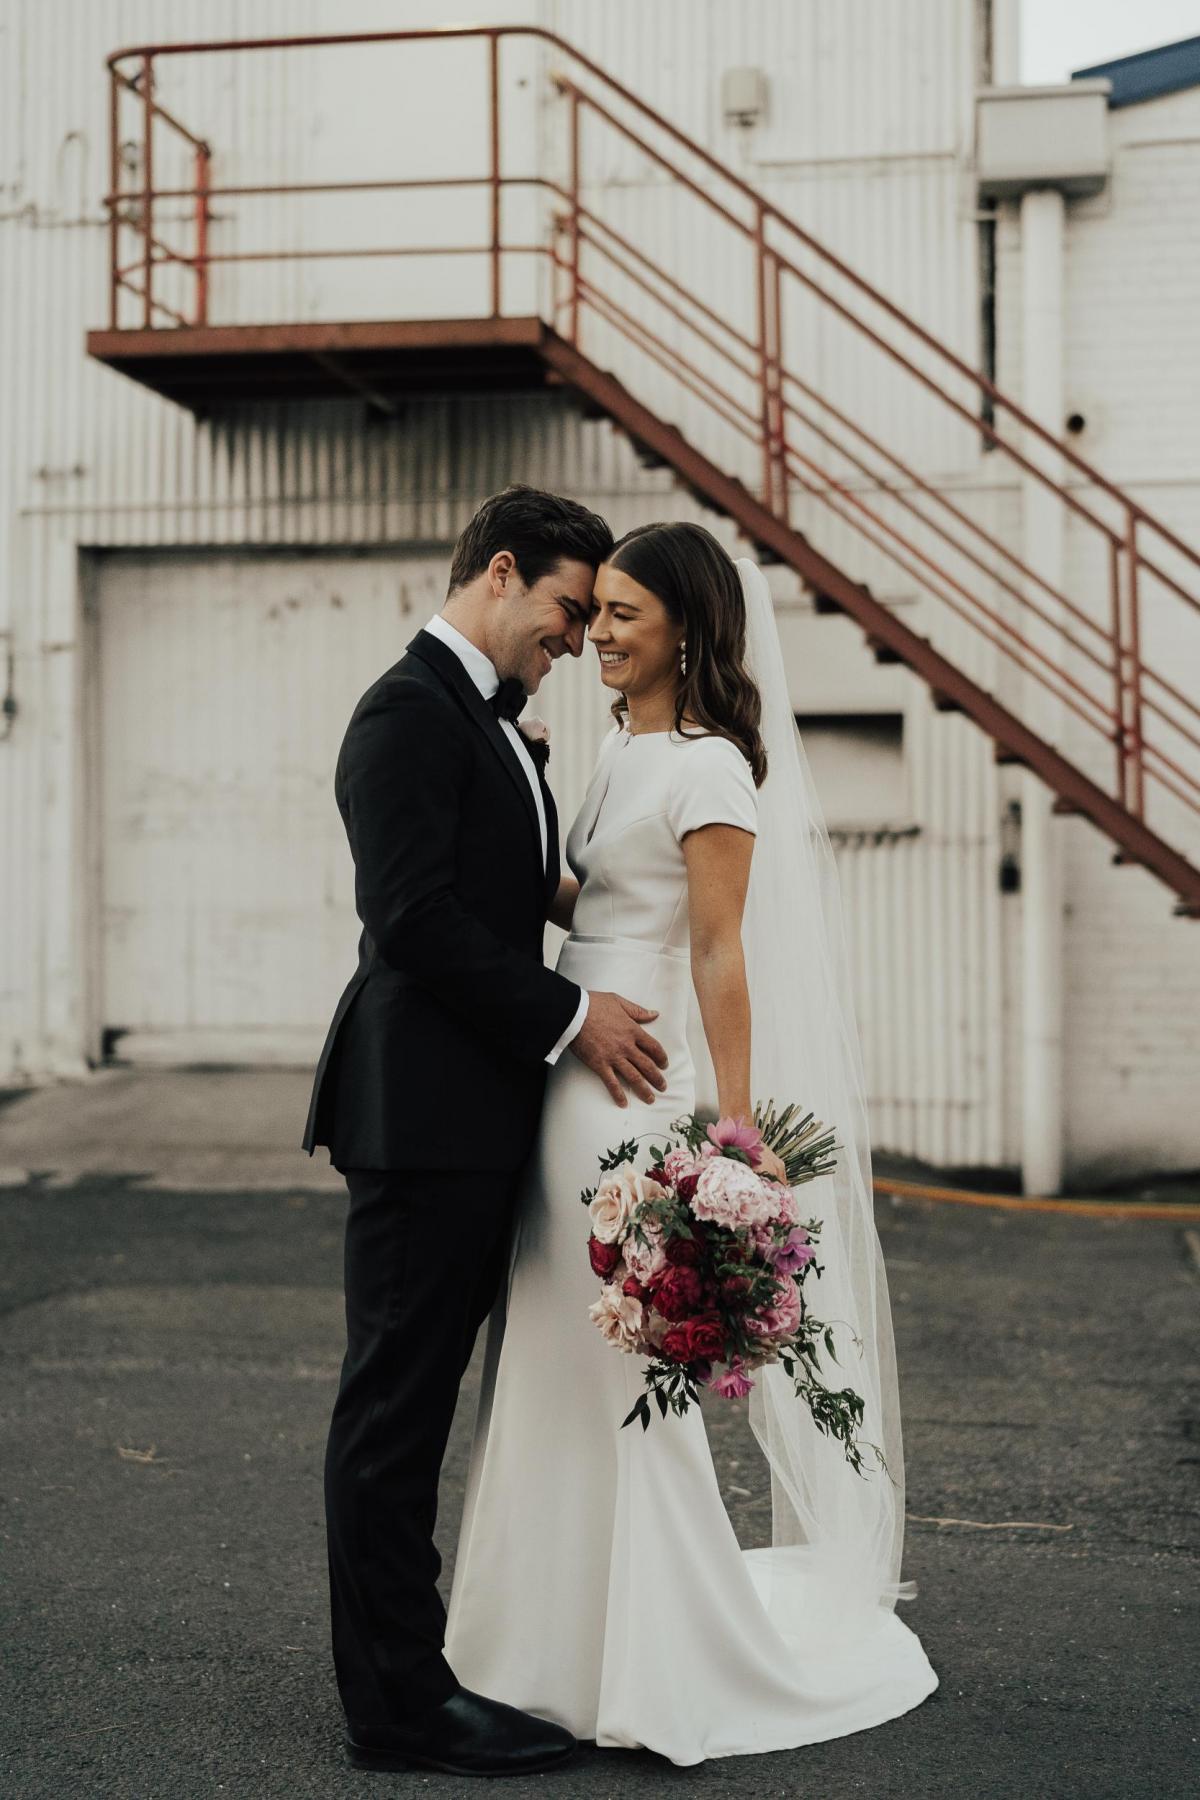 Read all about our real bride's wedding in this blog. She wore the Wild Hearts Clarissa wedding dress by Karen Willis Holmes.